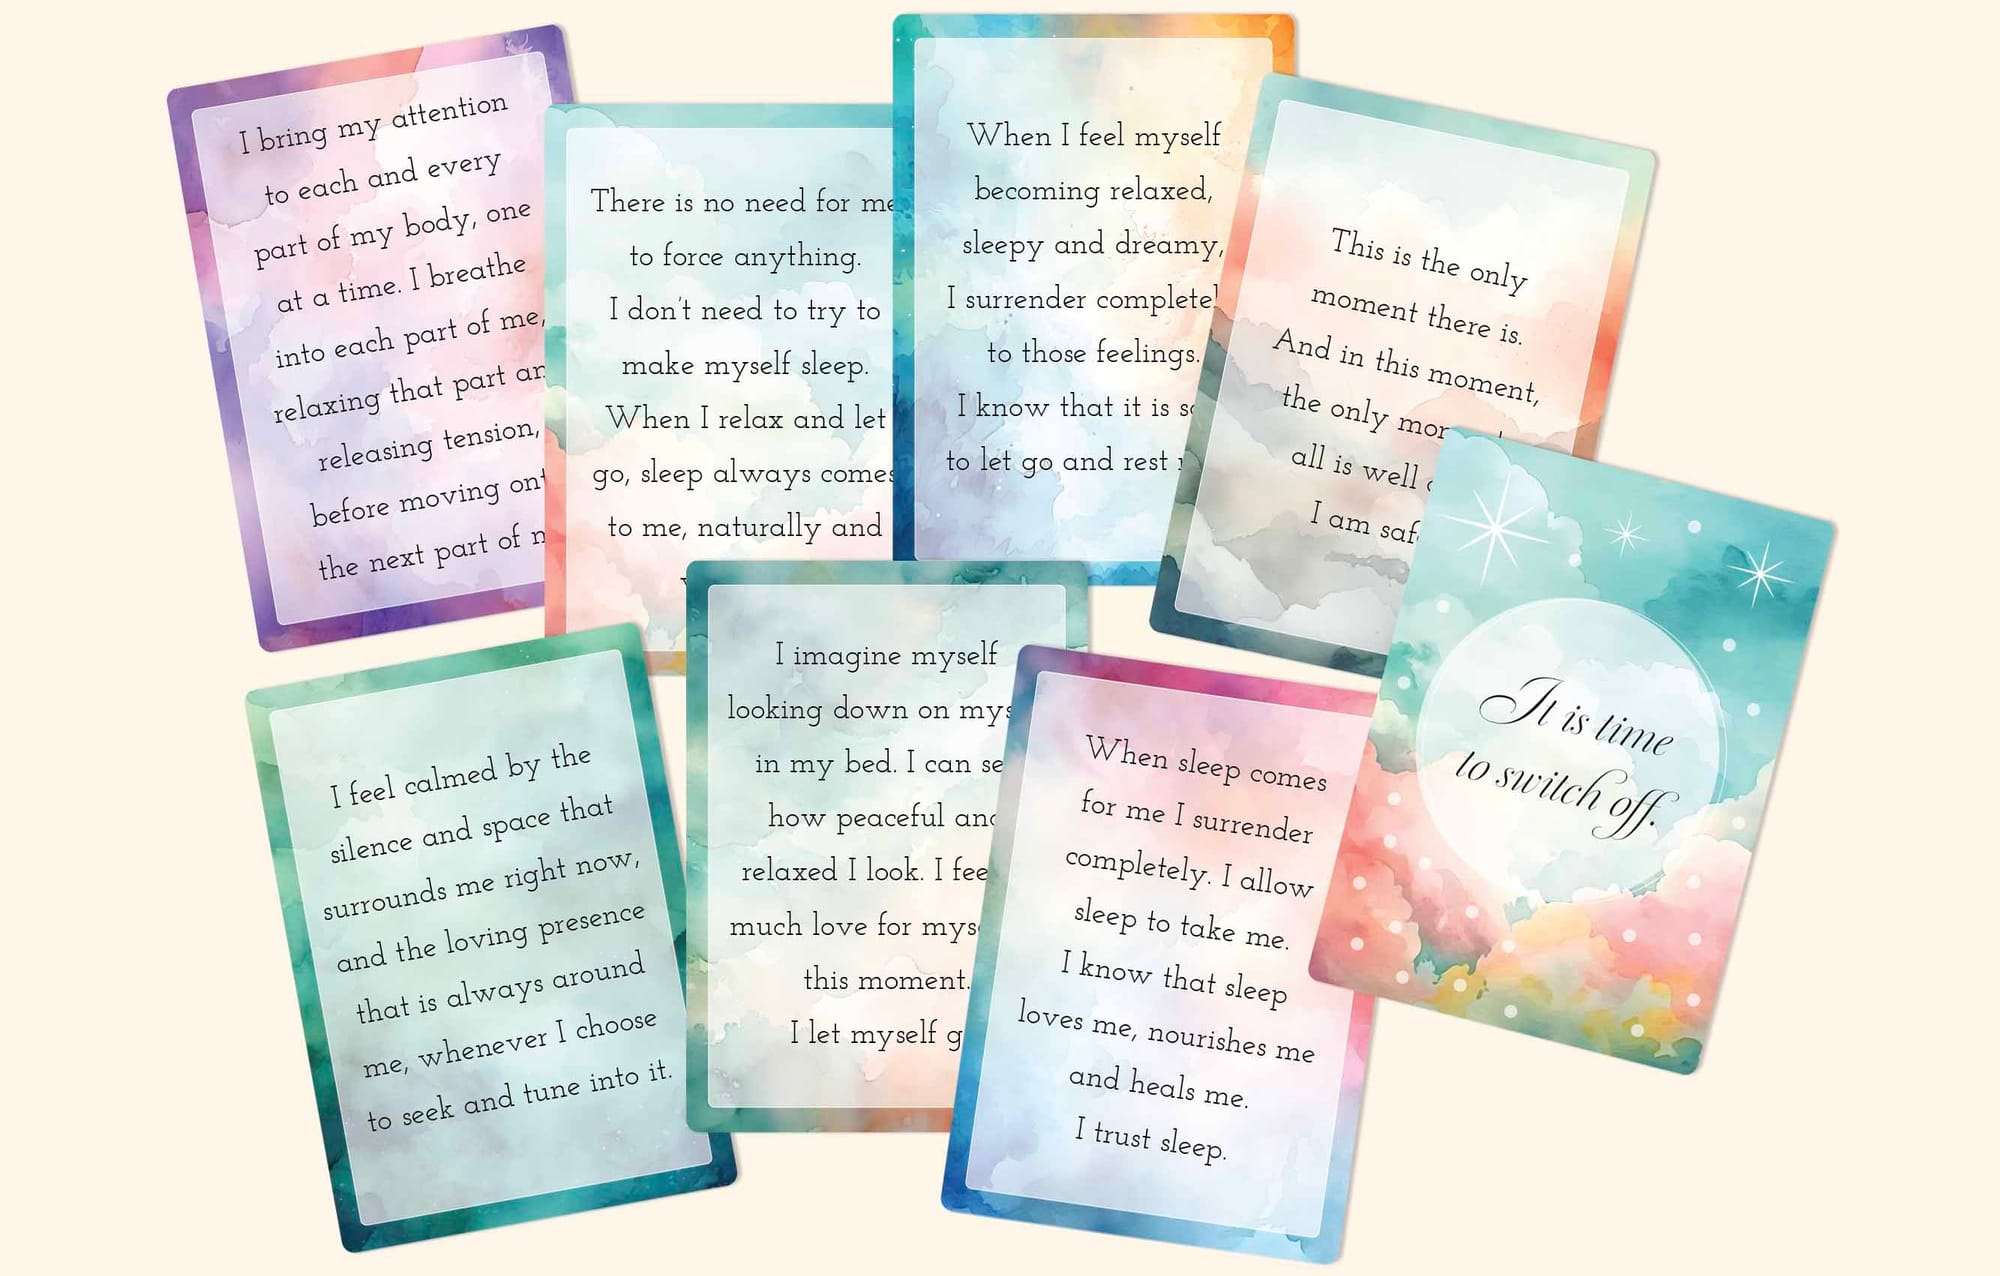 23 printable positive affirmation cards for getting a great night of sleep.